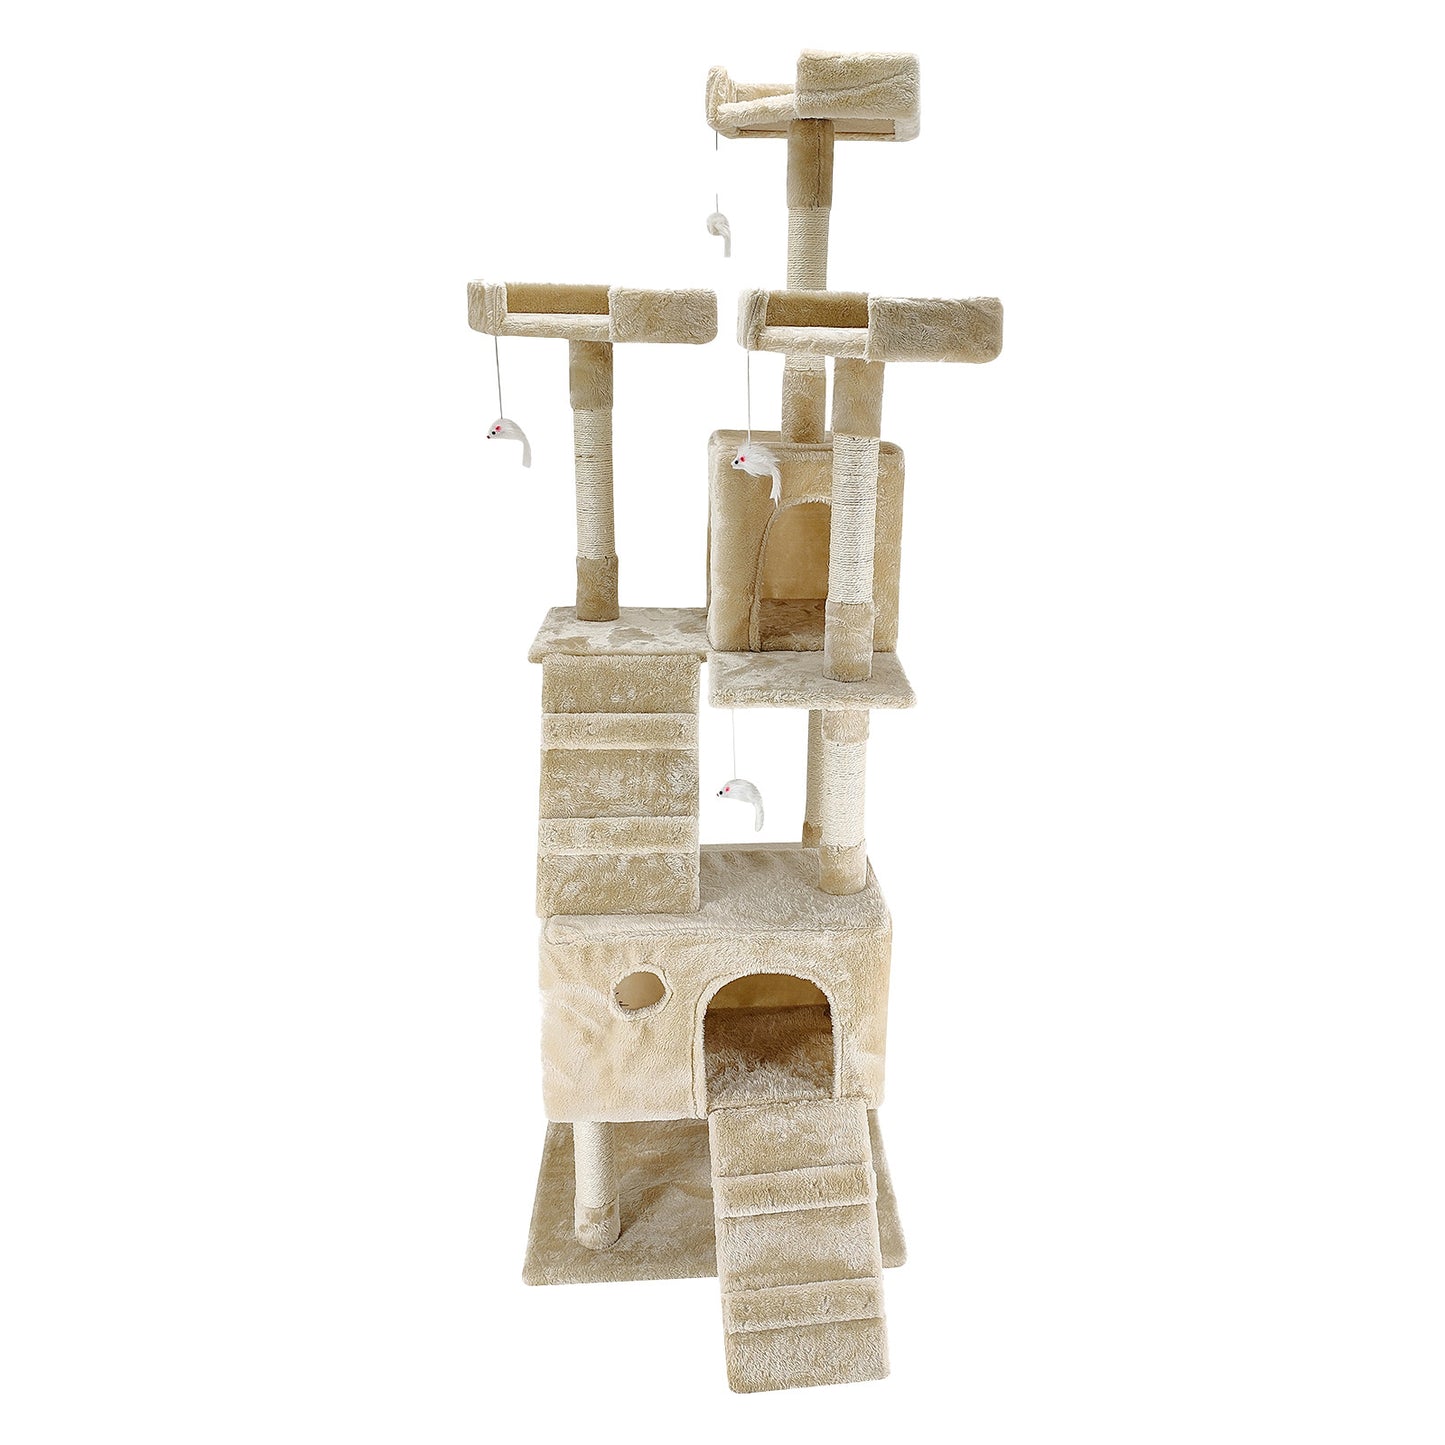 4Paws Cat Tree Scratching Post House Furniture Bed Luxury Plush Play 180cm - Beige